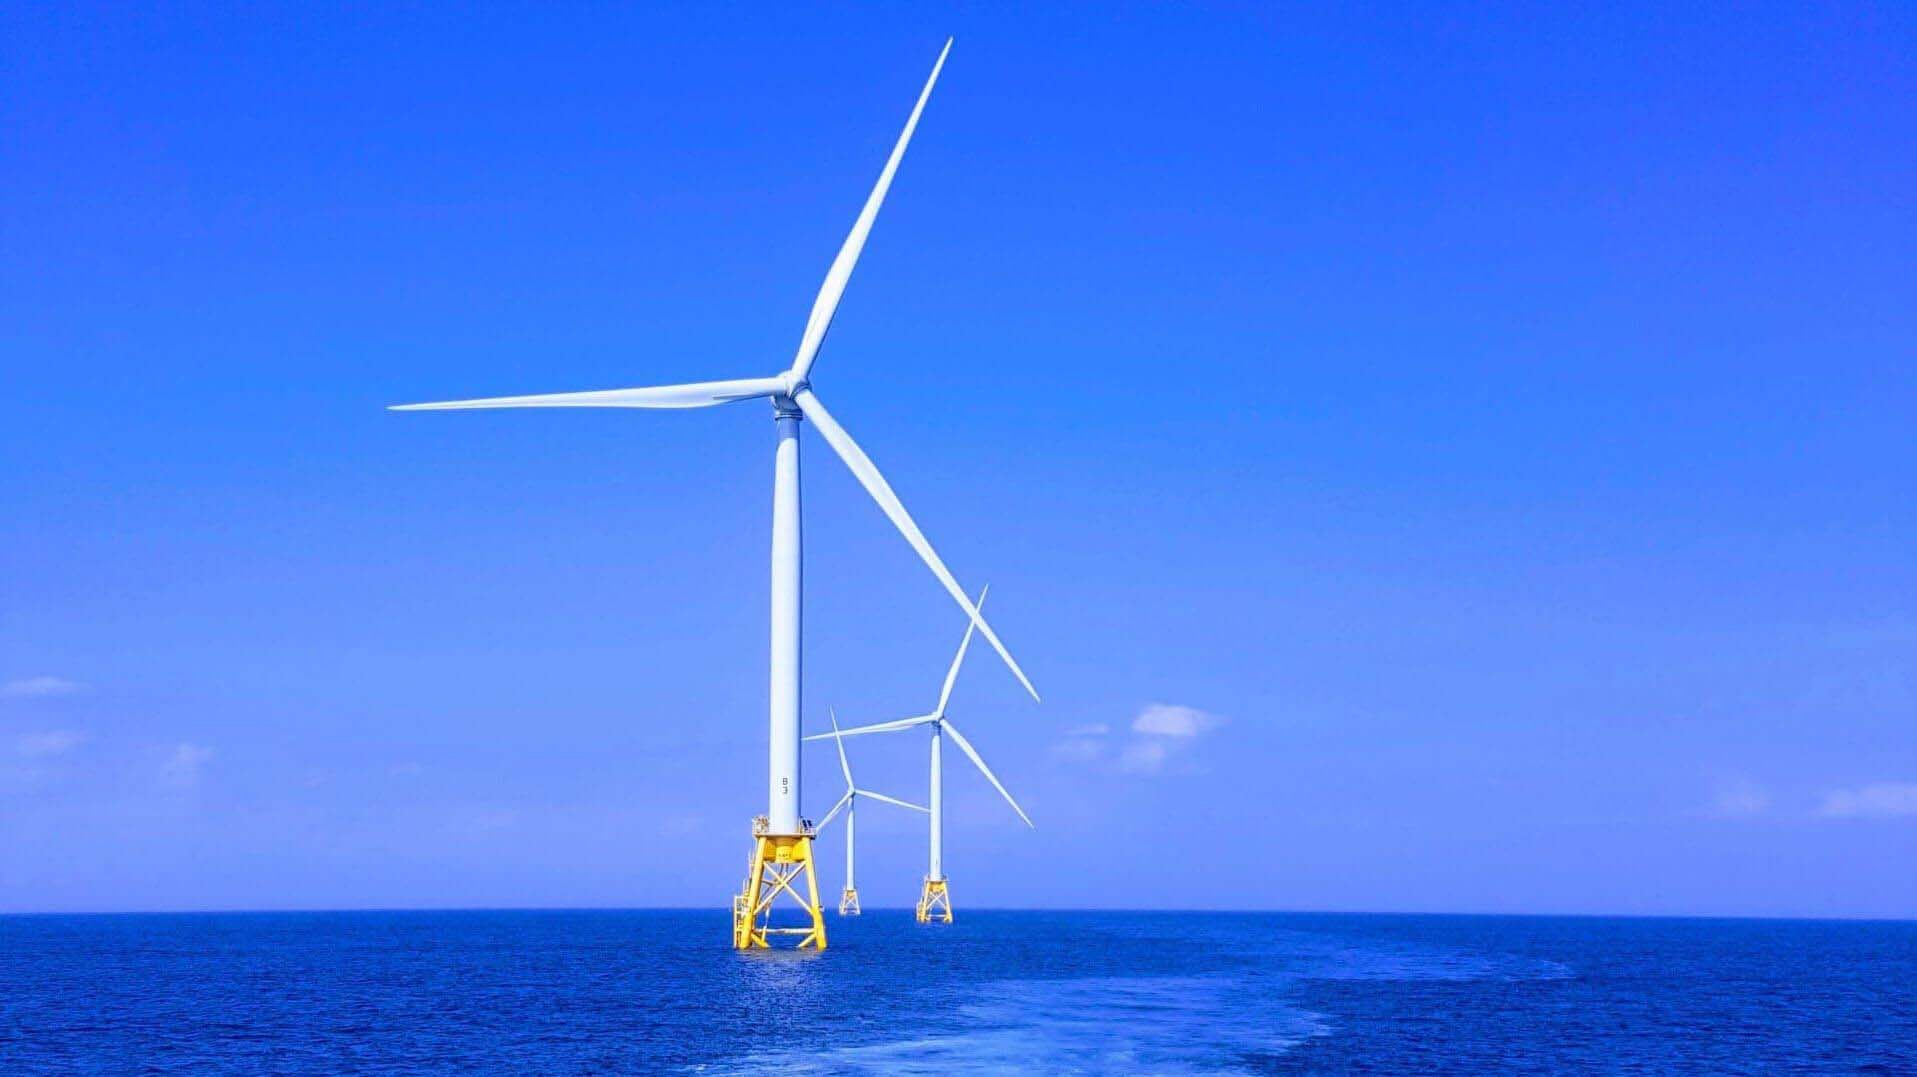 Offshore wind farm in blue sea with blue sky above